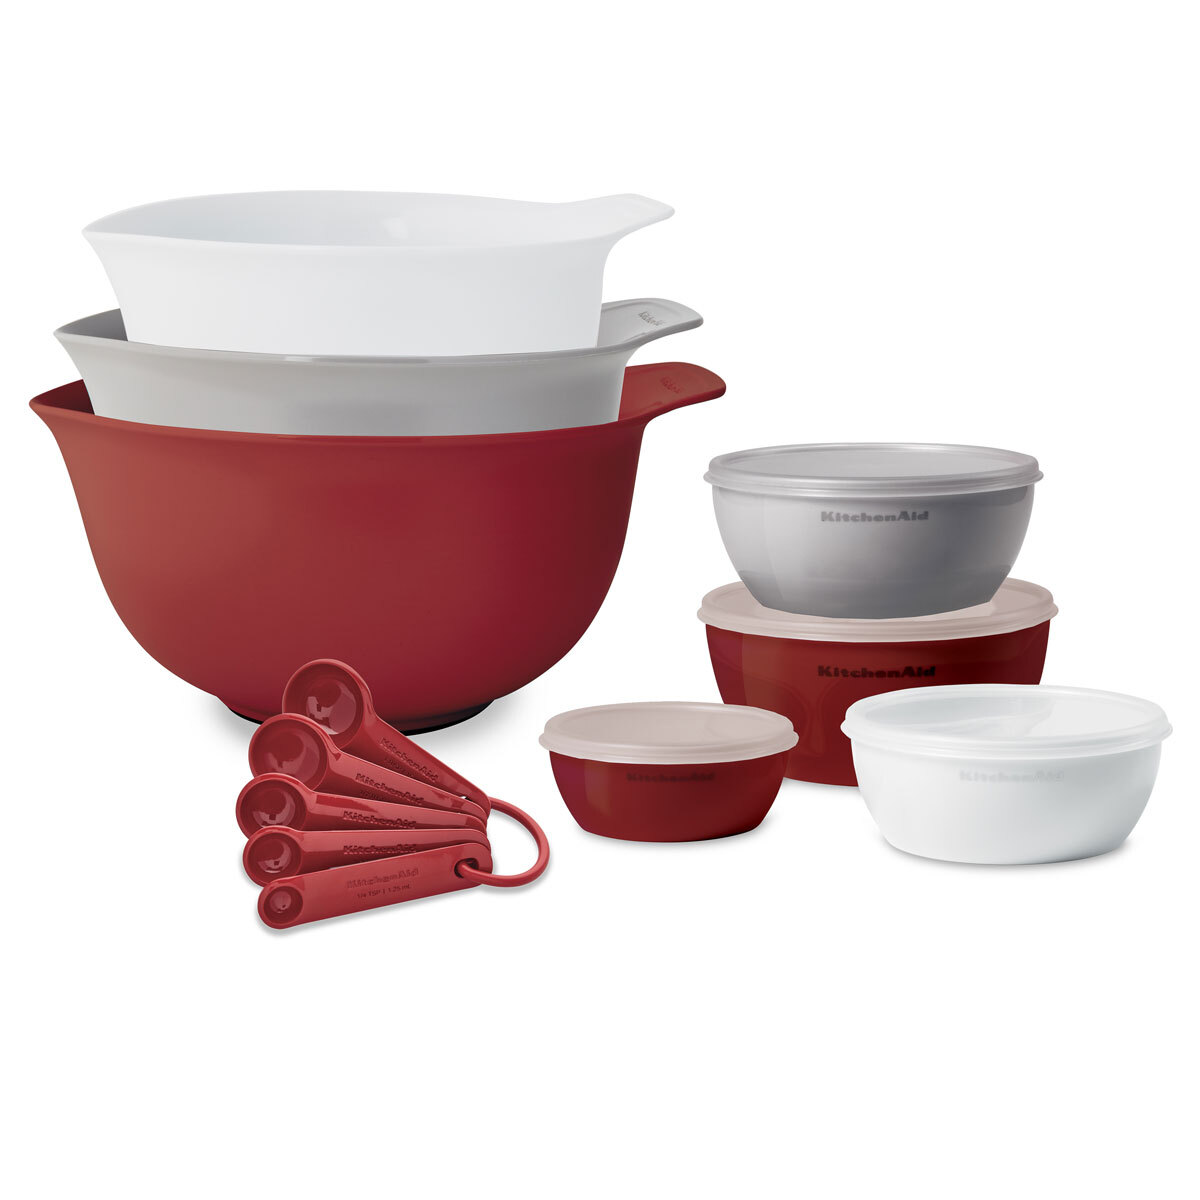 KitchenAid Bake, Mix and Measure 12 Piece Set in 2 Colours